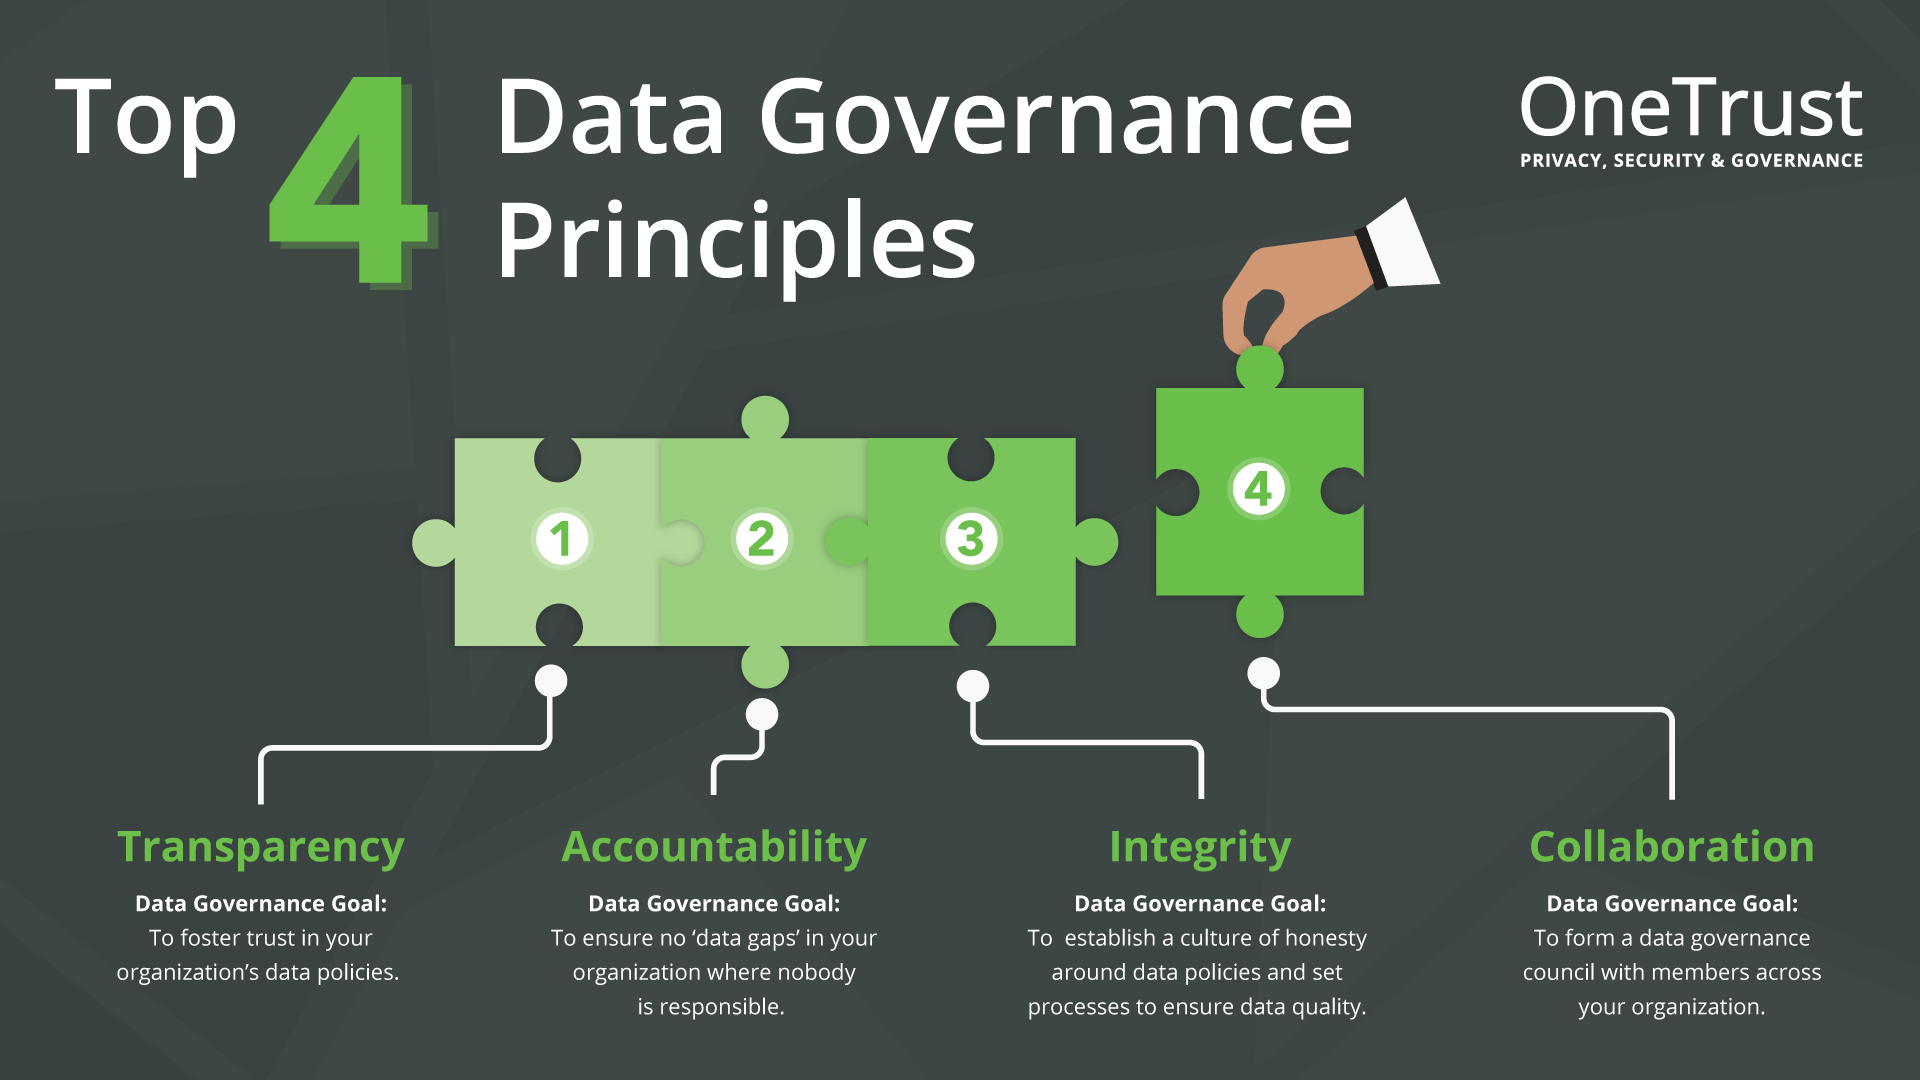 Infographic showing puzzle pieces that represent the top 4 data governance principles, transparency, accountability, integrity and collaboration